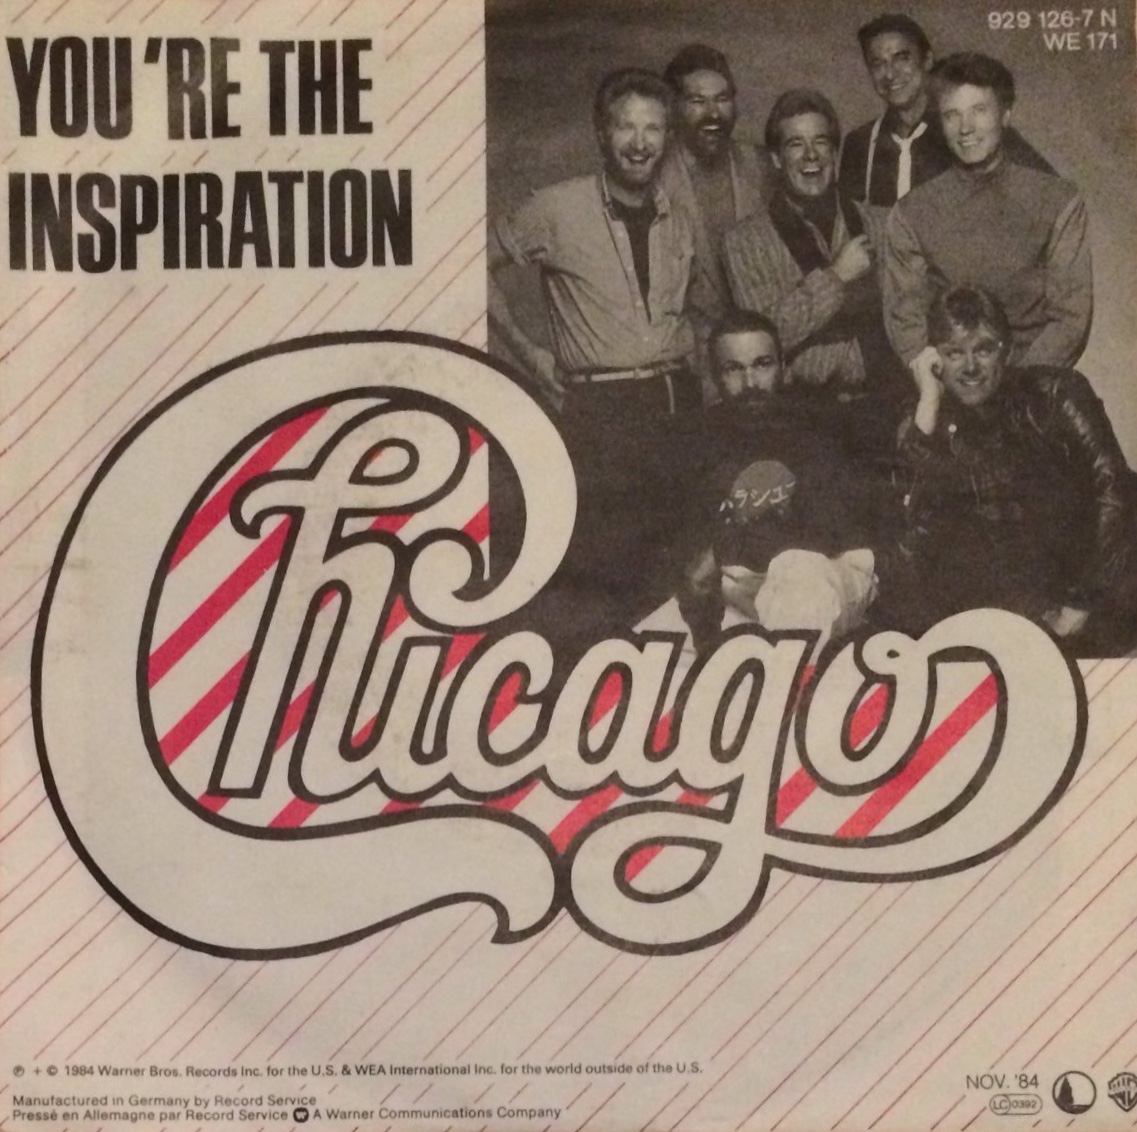 Art for YOU'RE THE INSPIRATION by Chicago